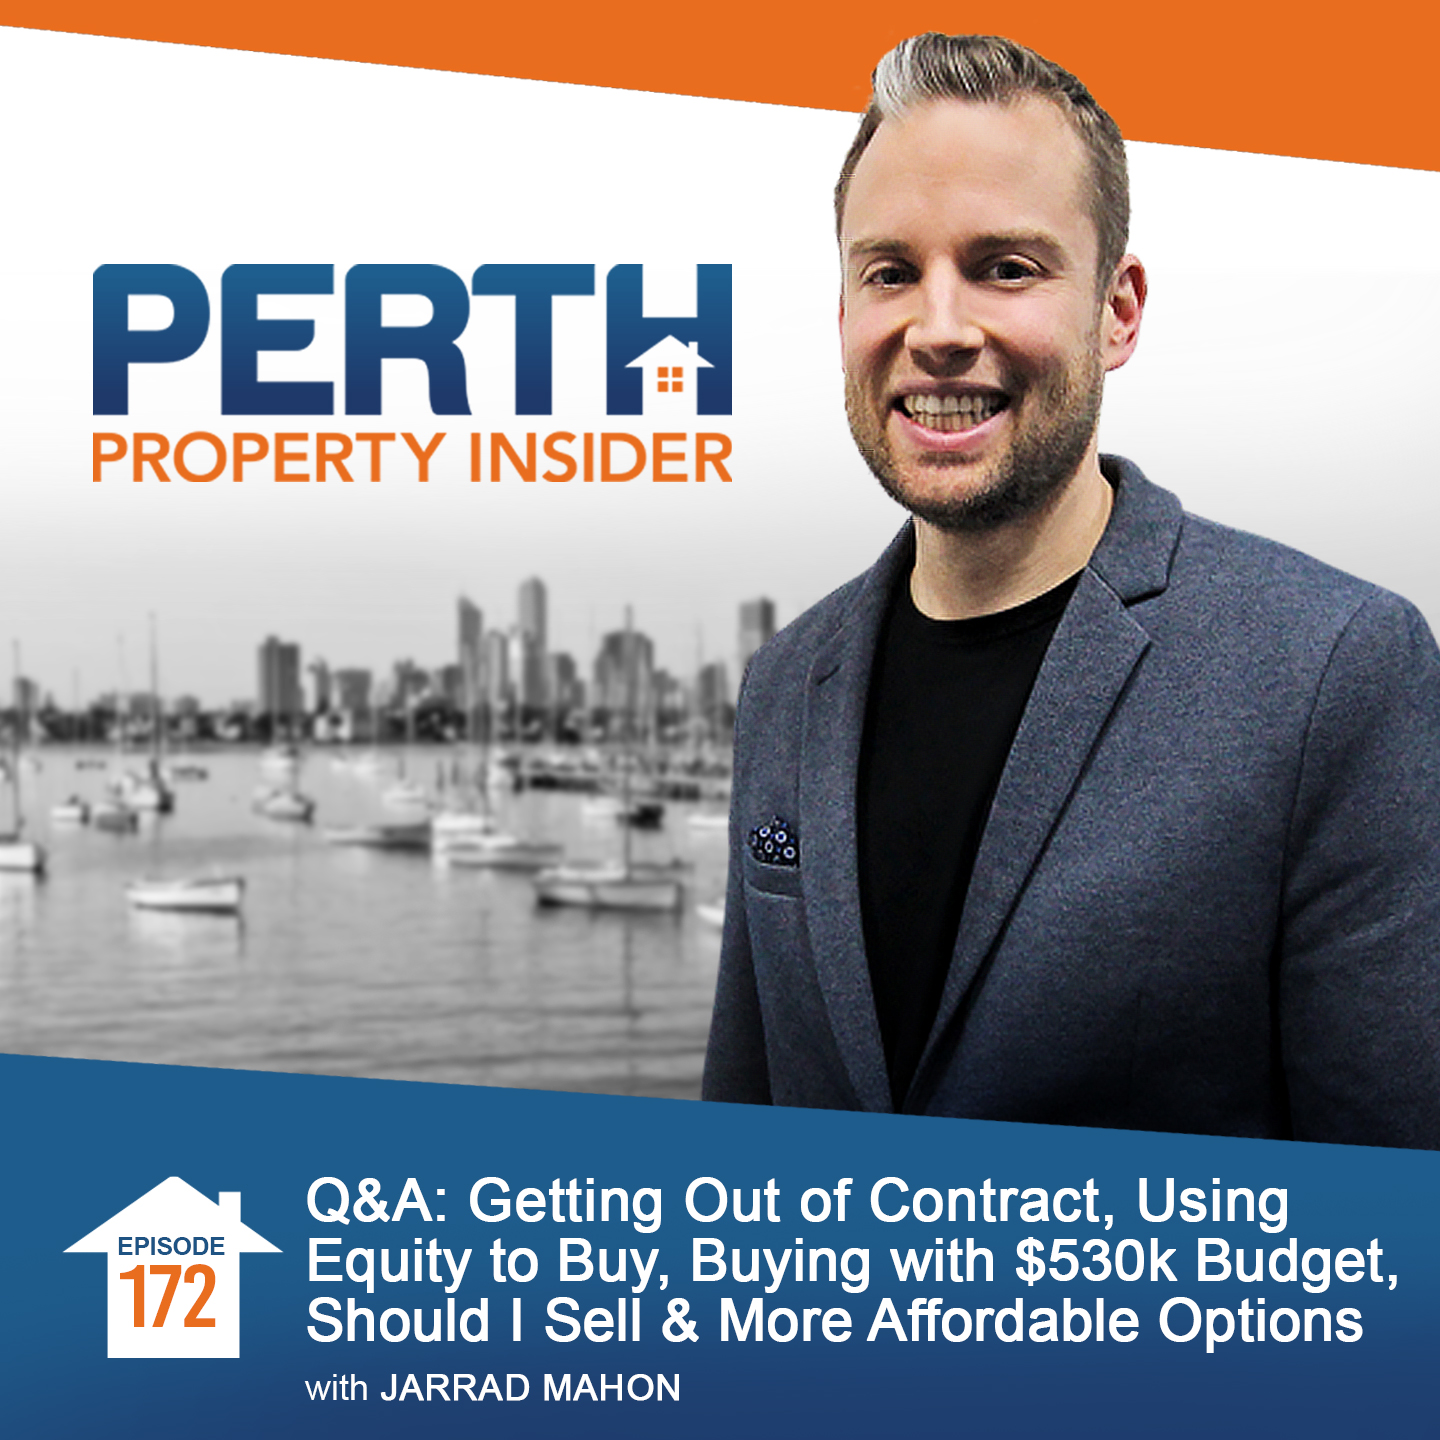 Q&A: Getting Out of Contract, Using Equity to Buy, Buying with$530k Budget, Should I Sell & More Affordable Options